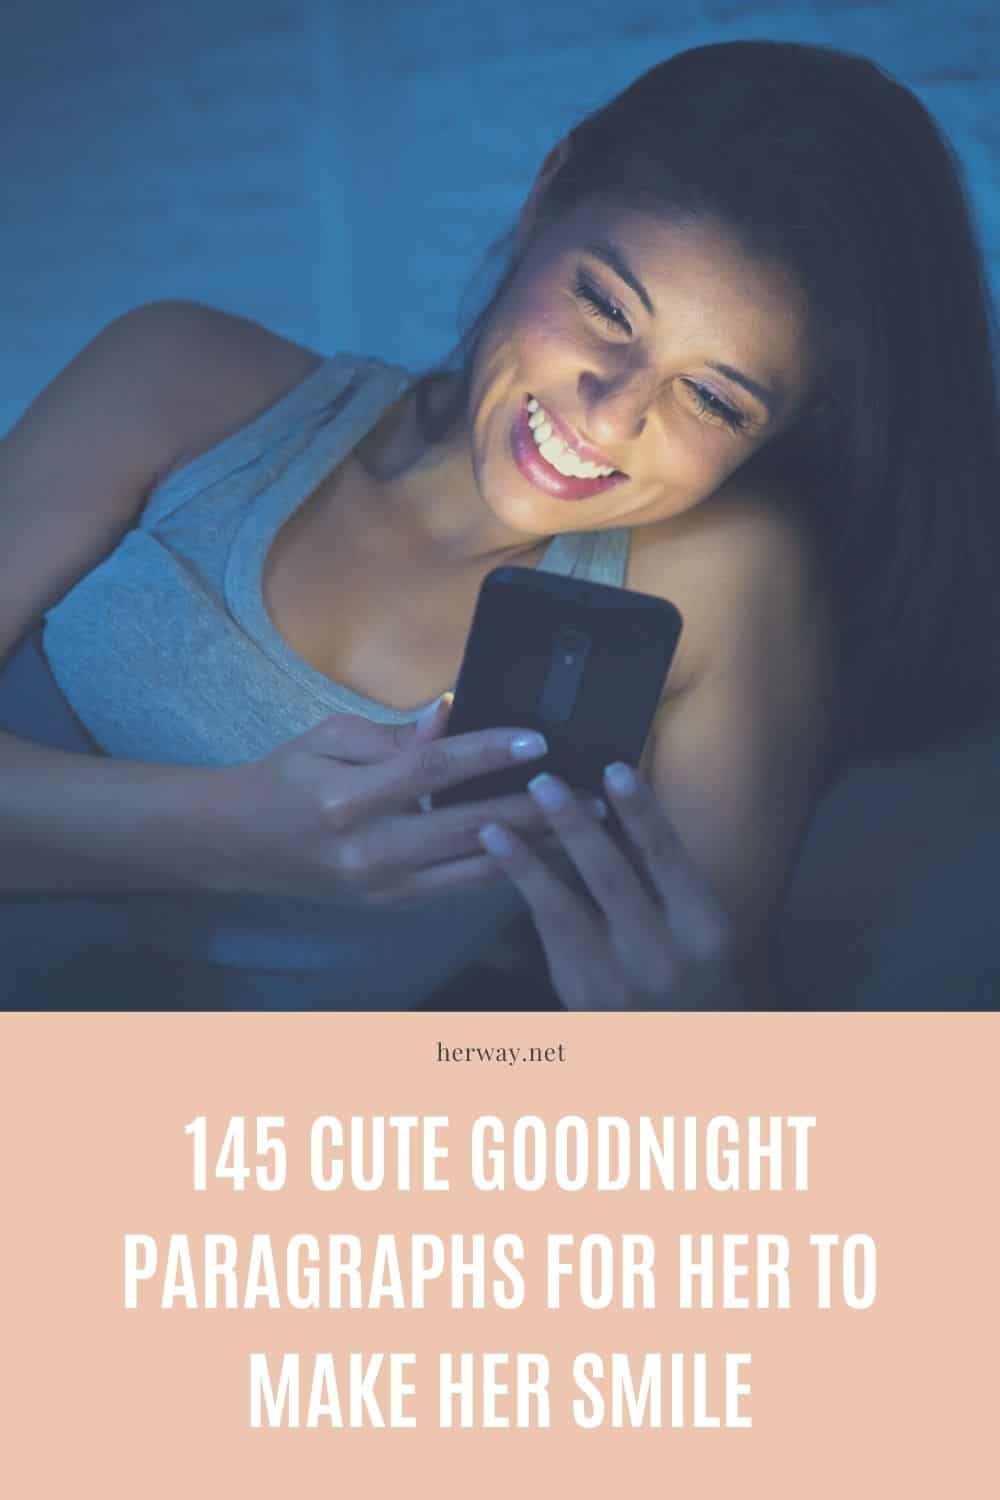 145 Cute Goodnight Paragraphs For Her To Make Her Smile